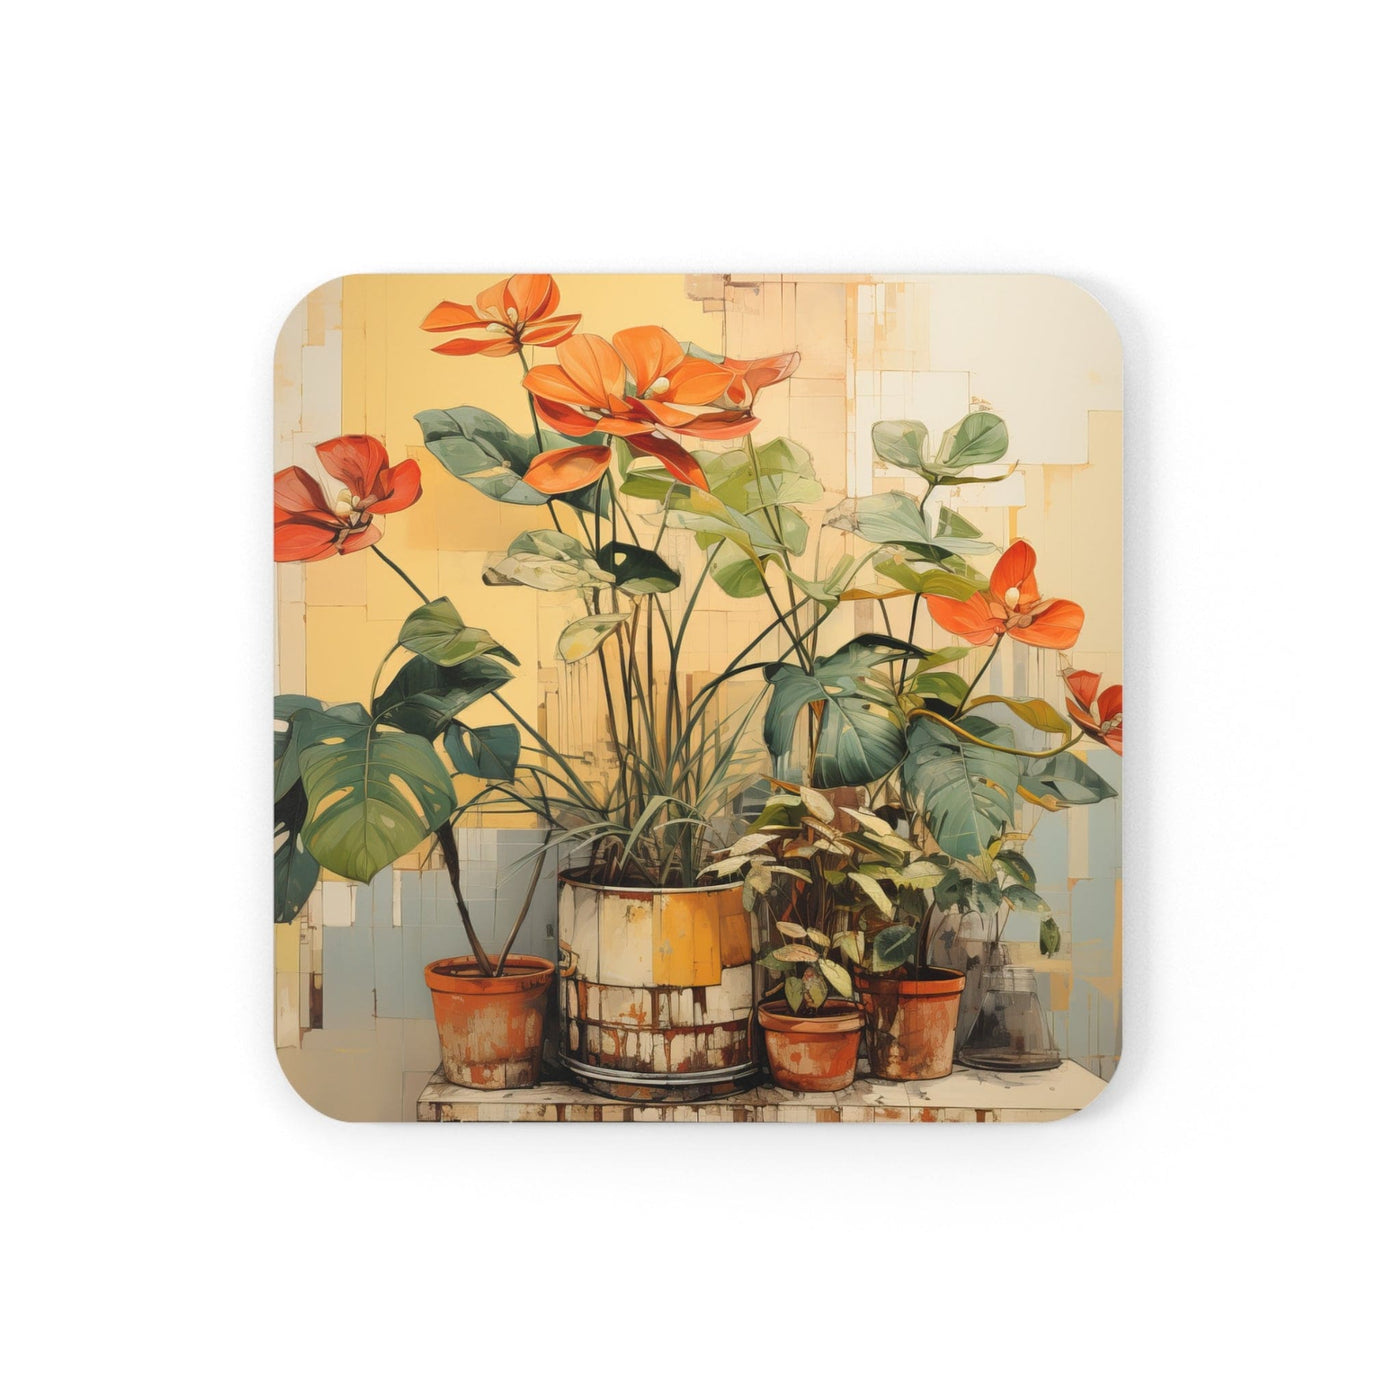 Coaster Set Of 4 For Drinks Earthy Rustic Potted Plants Print - Decorative